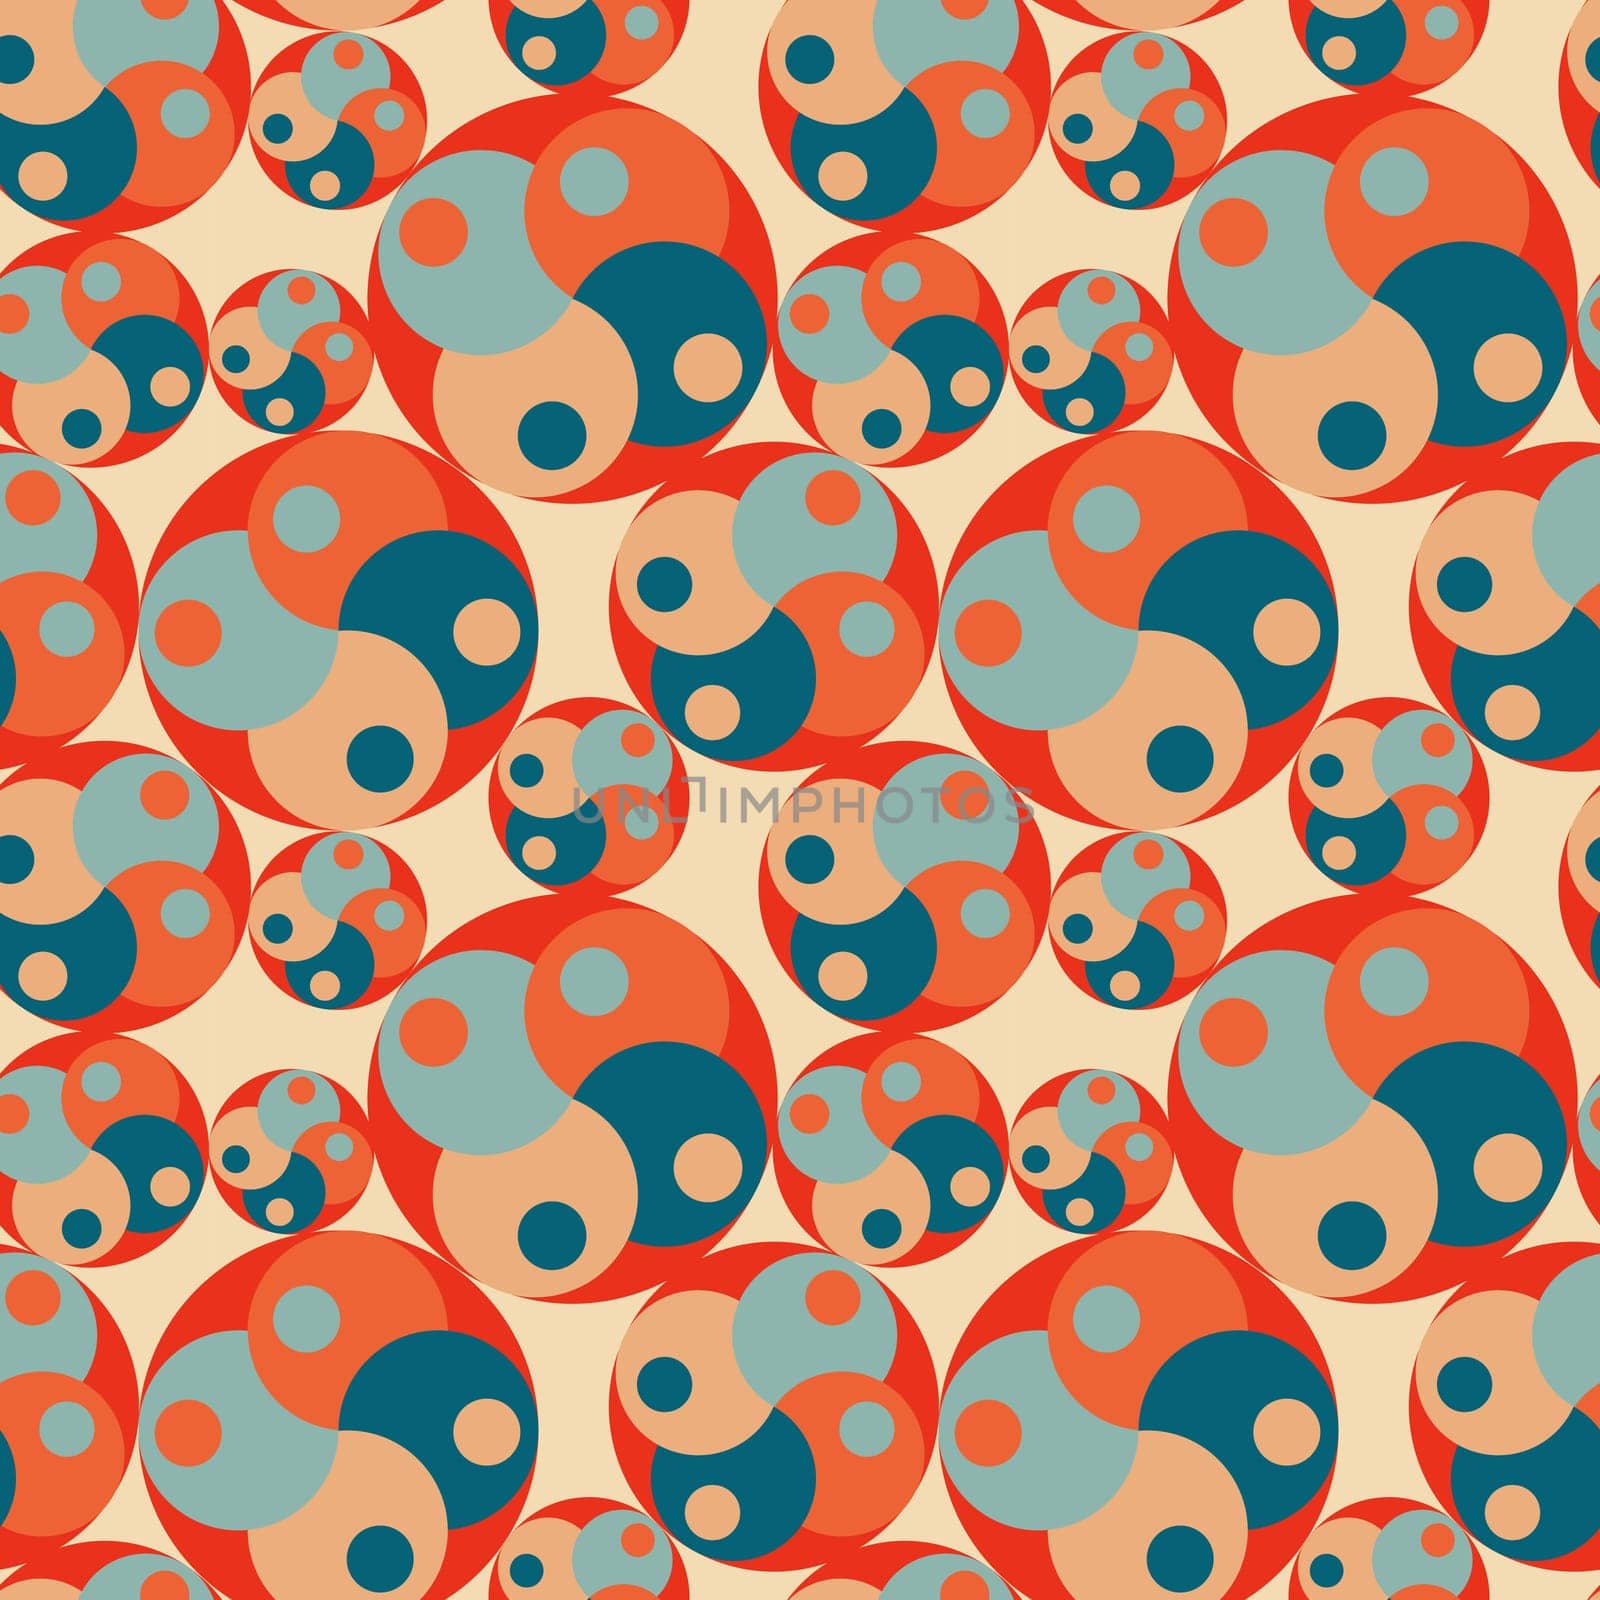 Vintage geometric pattern with circles in the style of the 70s and 60s